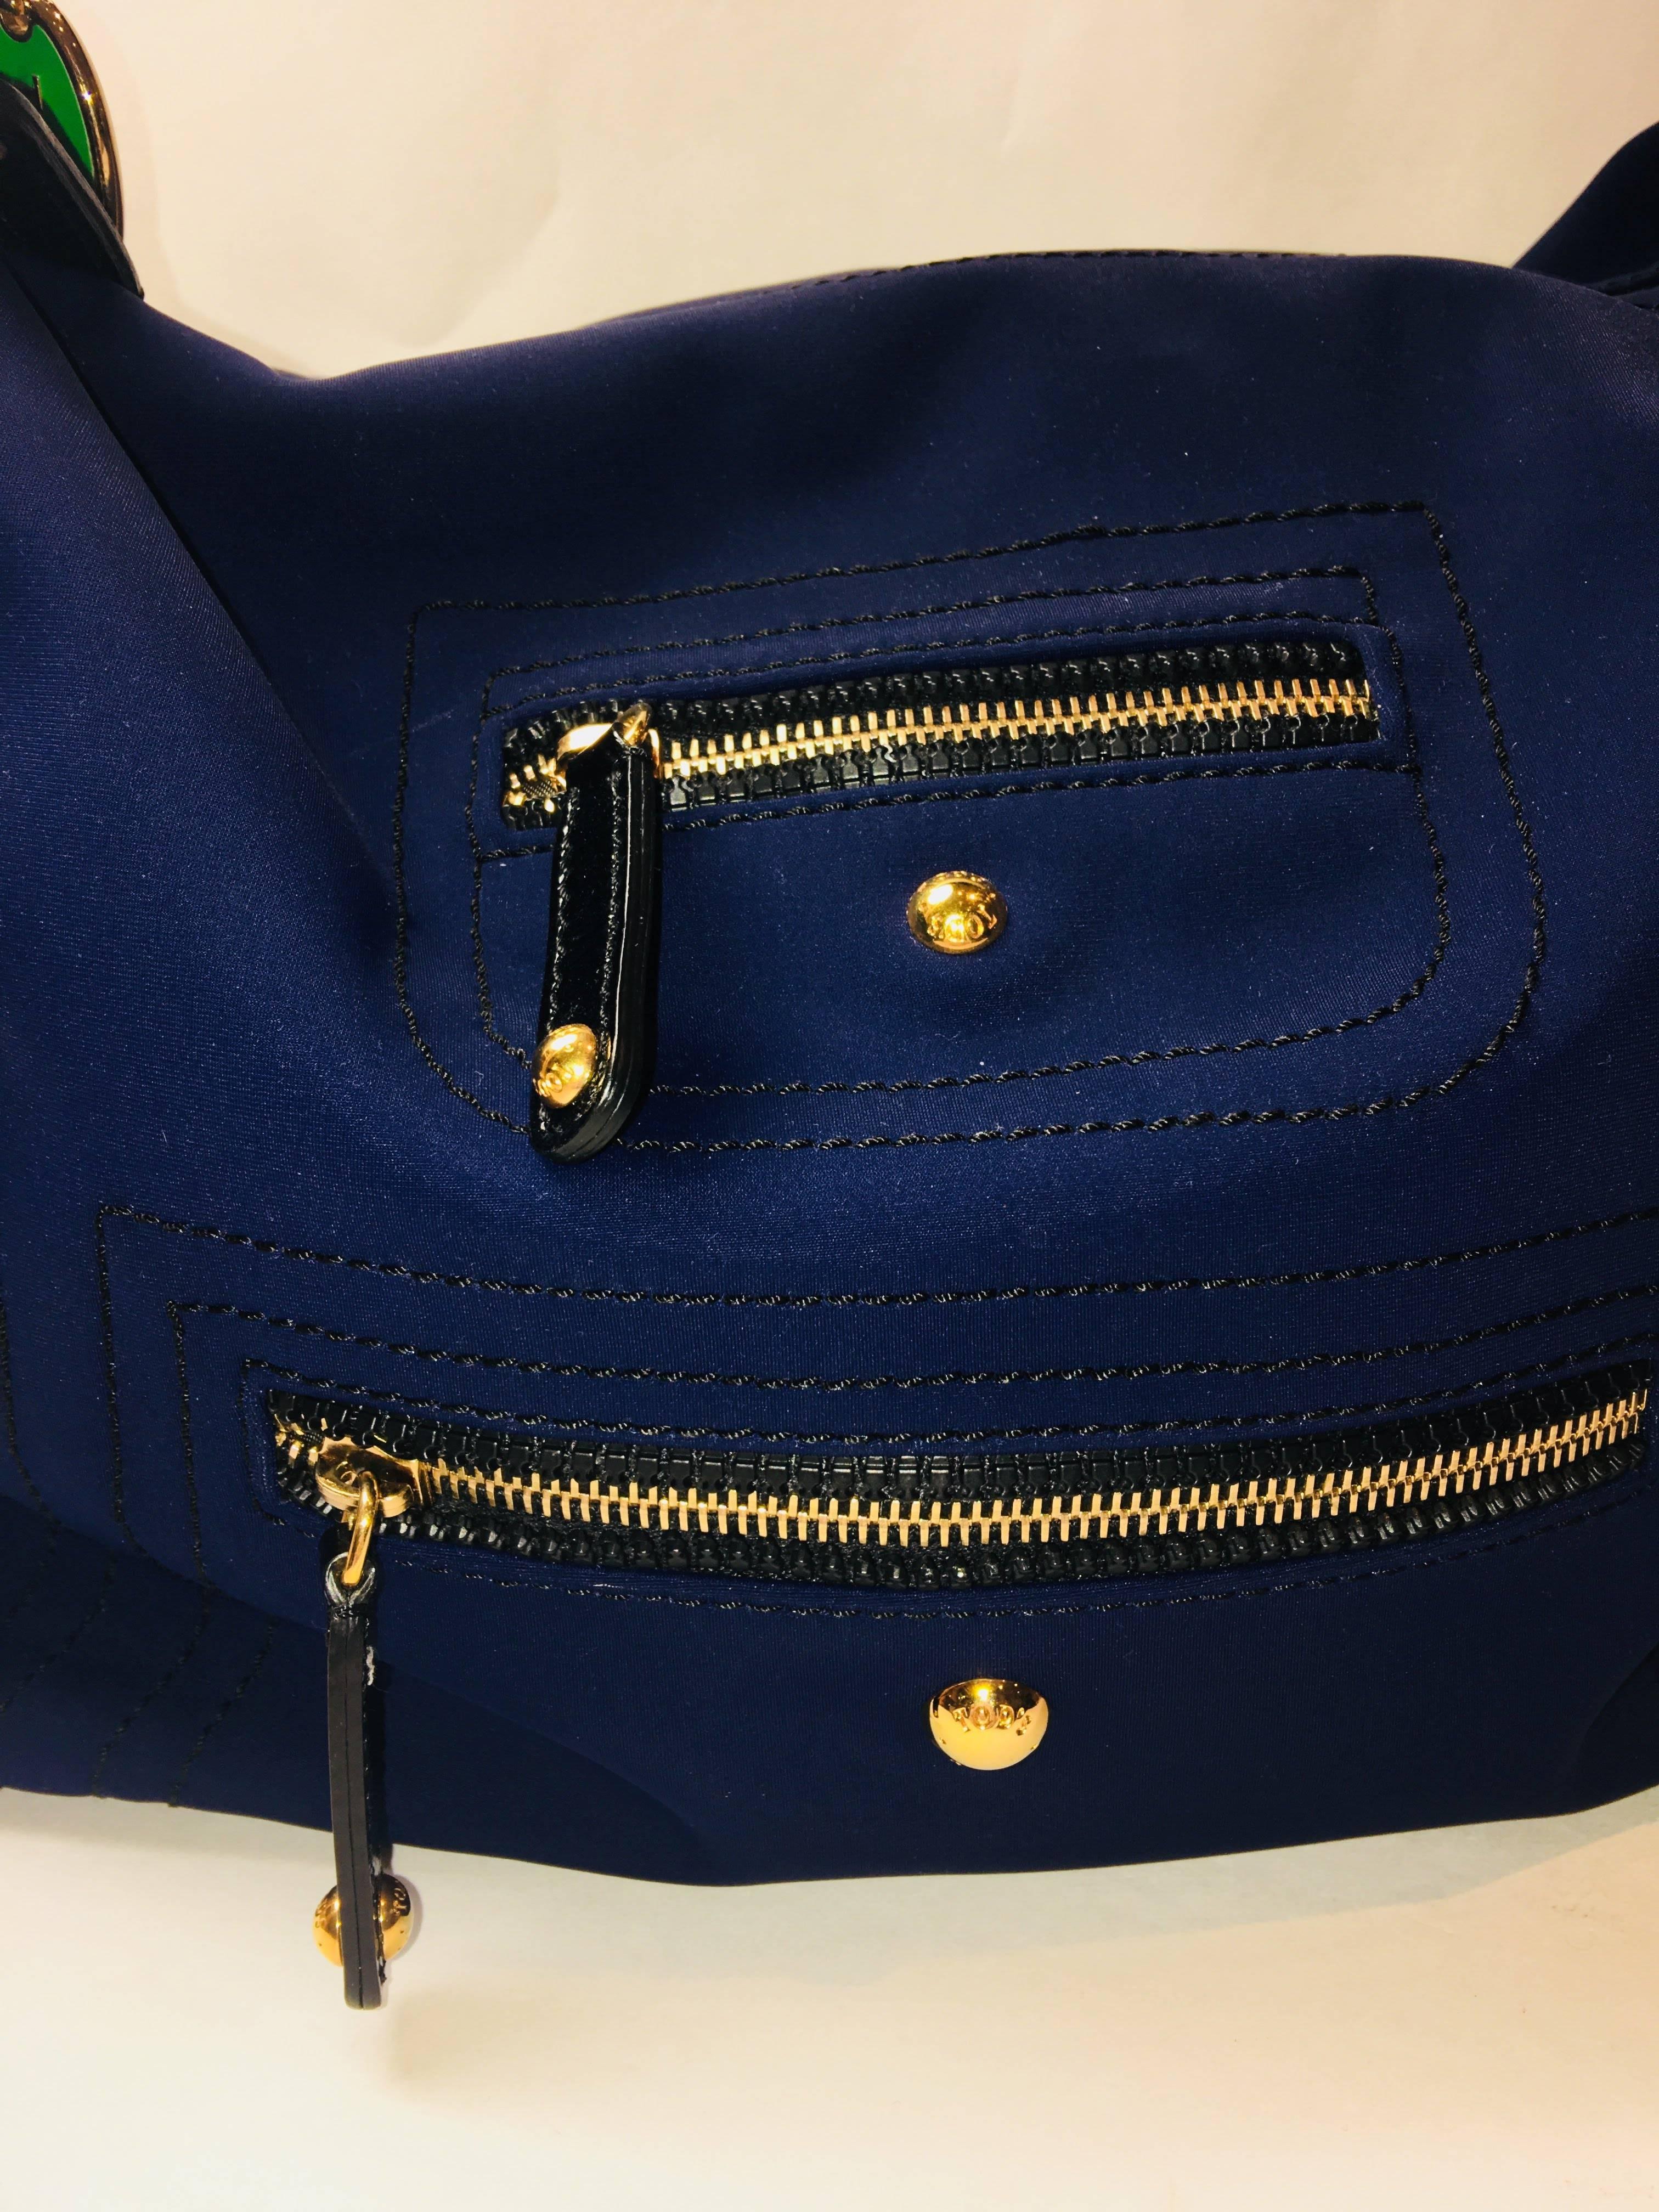 Tods Pashmy Phyton Bag in Navy Nylon, Single black Patent Leather Strap, Zip Top, and Gold Hardware.